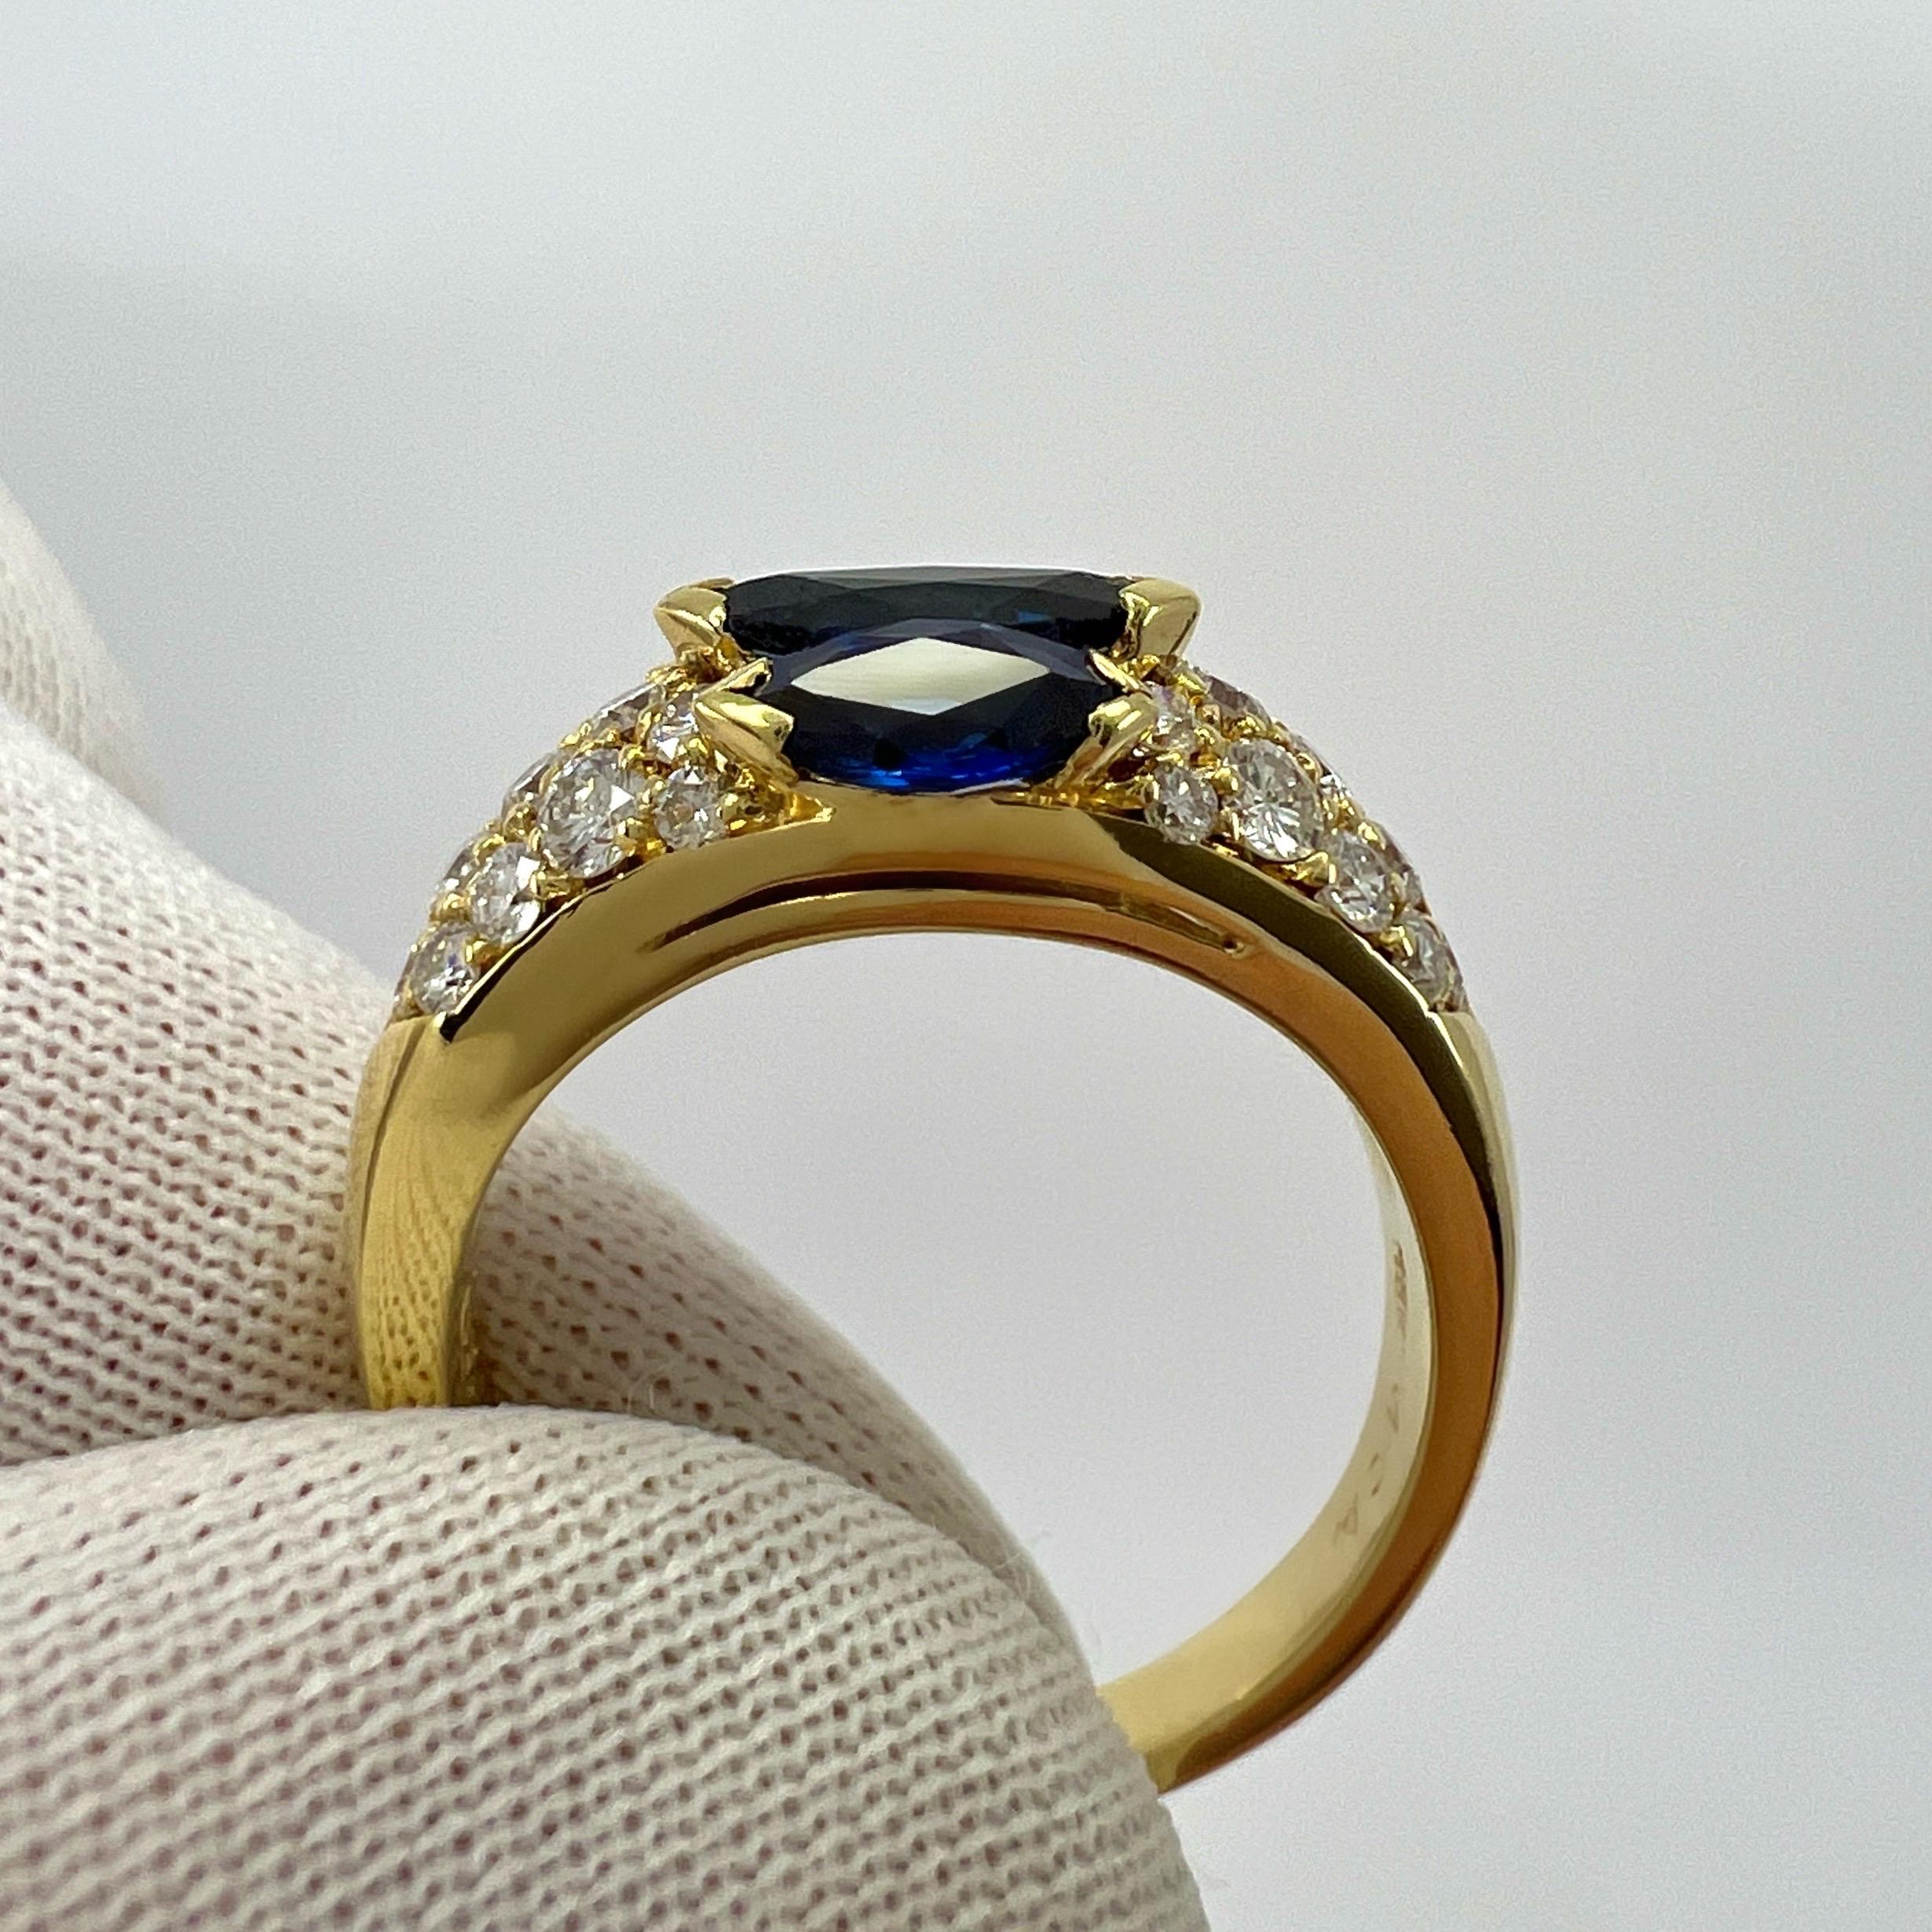 Rare Vintage Van Cleef & Arpels Marquise Blue Sapphire And Diamond Cocktail Ring For Sale 4